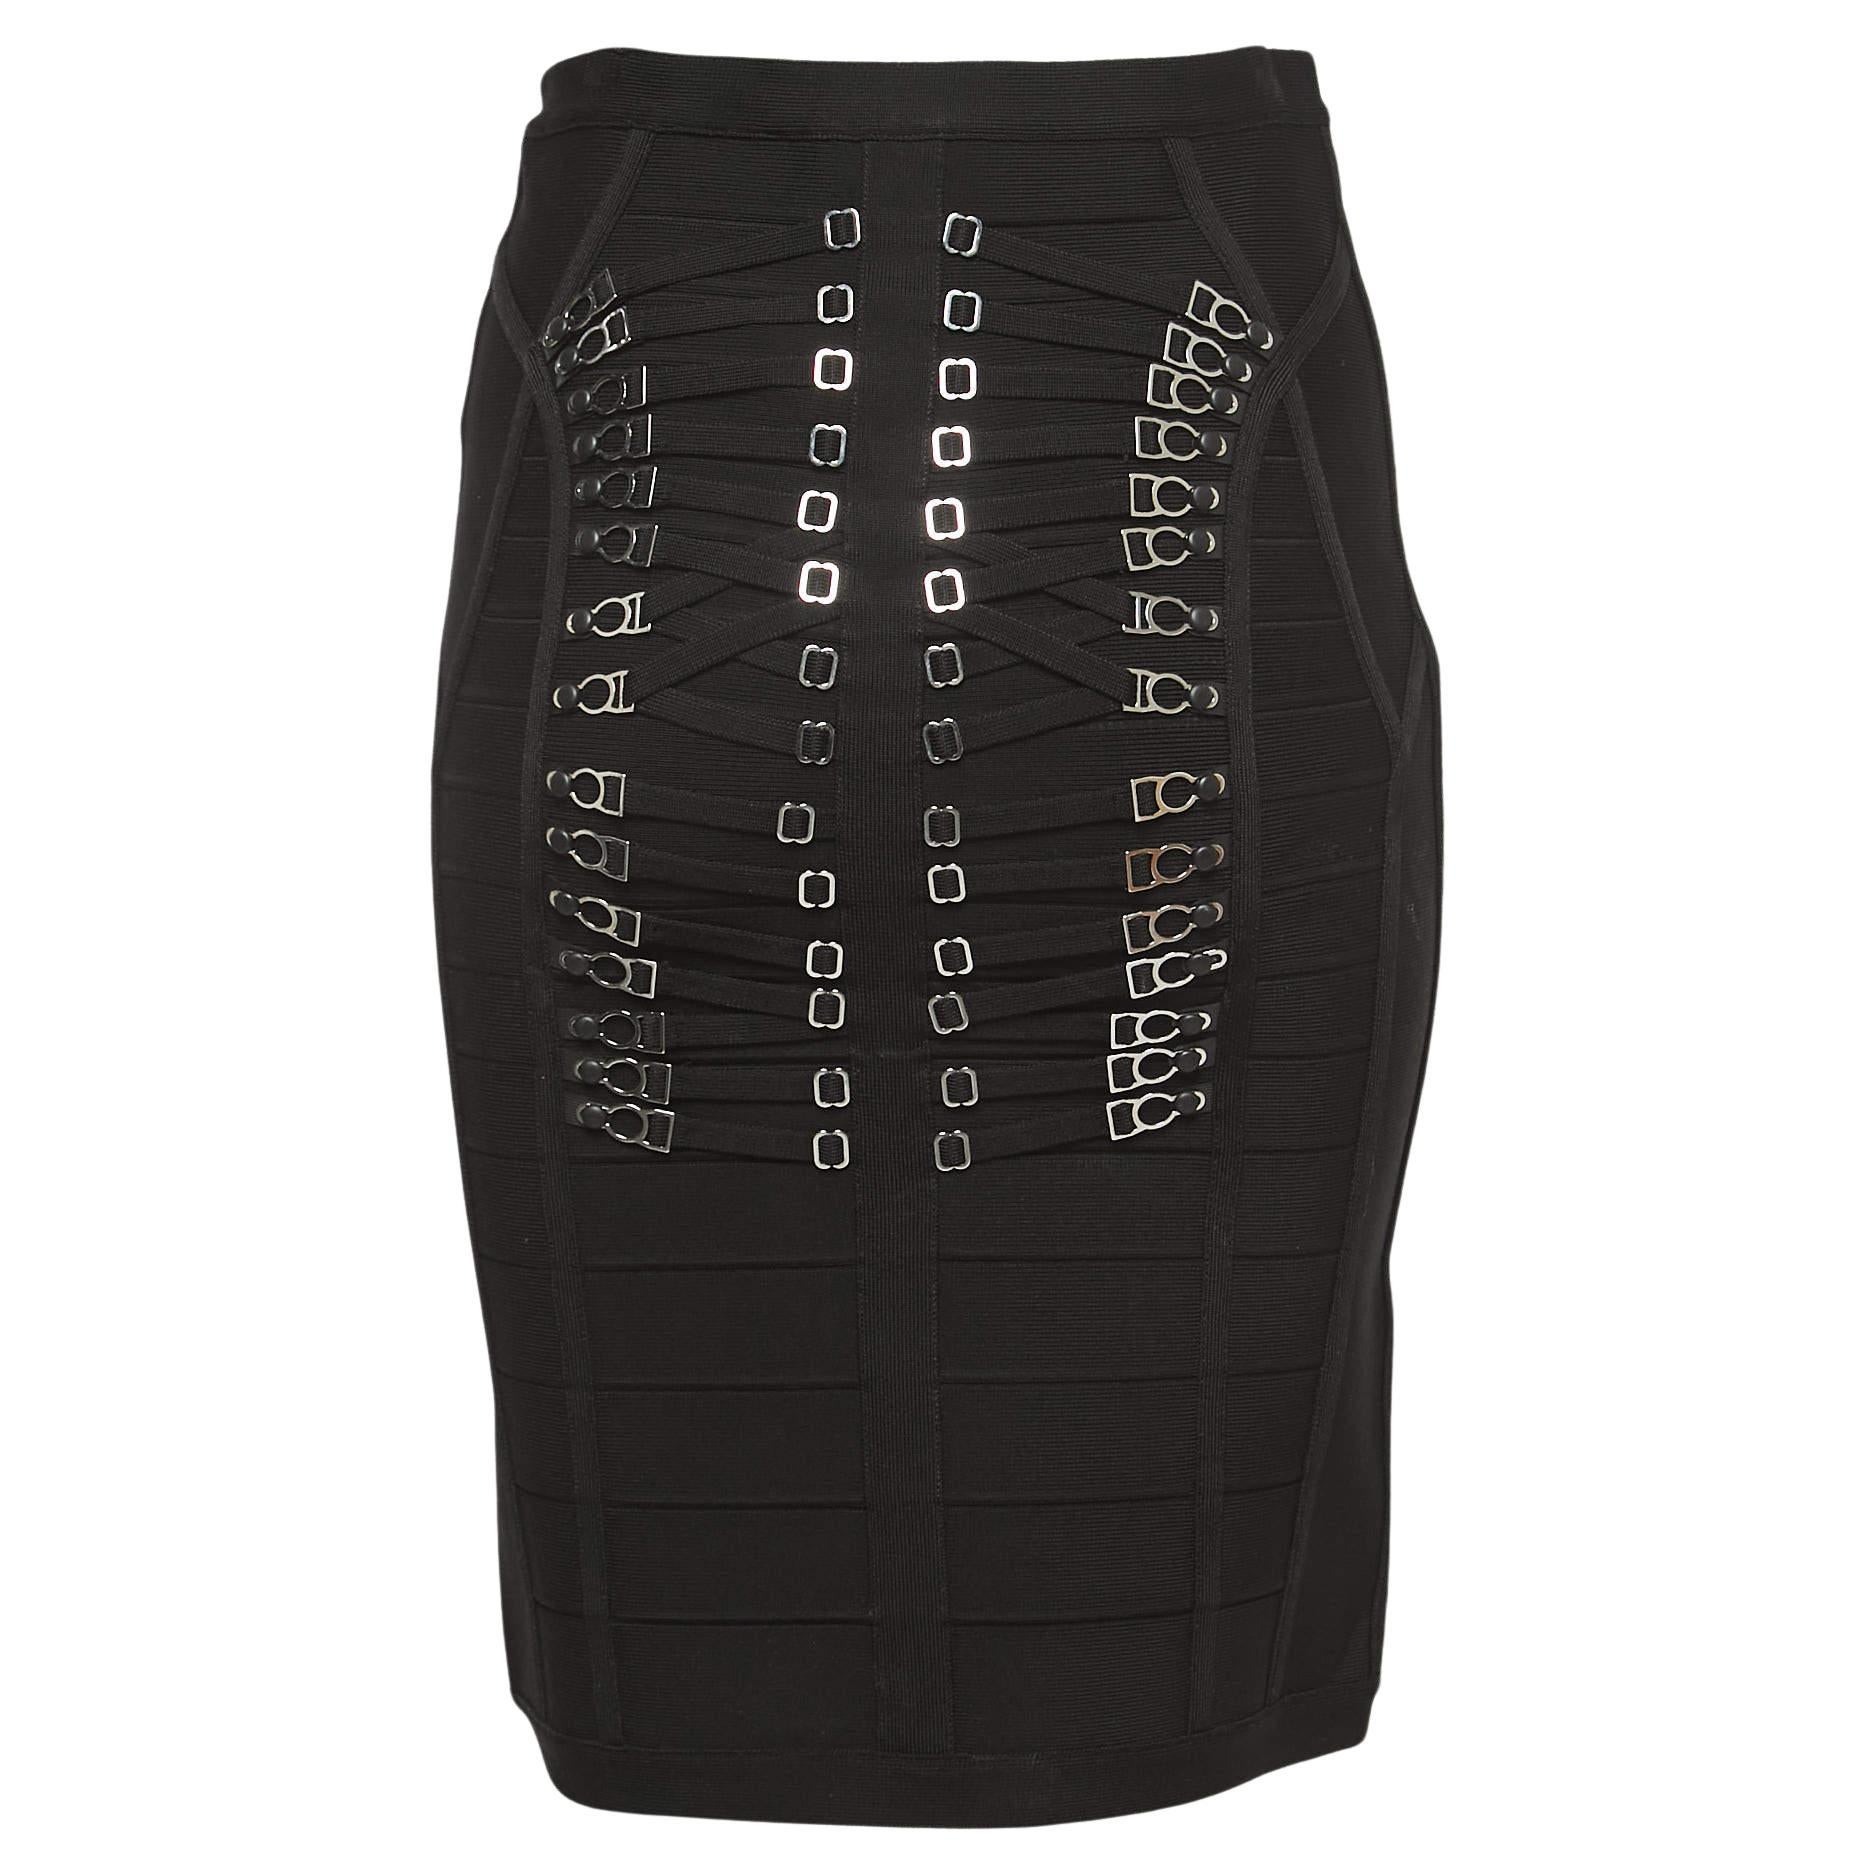 Experience the charm of designer clothing with this gorgeous skirt. Made from quality fabrics, the skirt has a simple allure and a great fit. Pair it up with a tailored blouse or a simple top and high heels.

